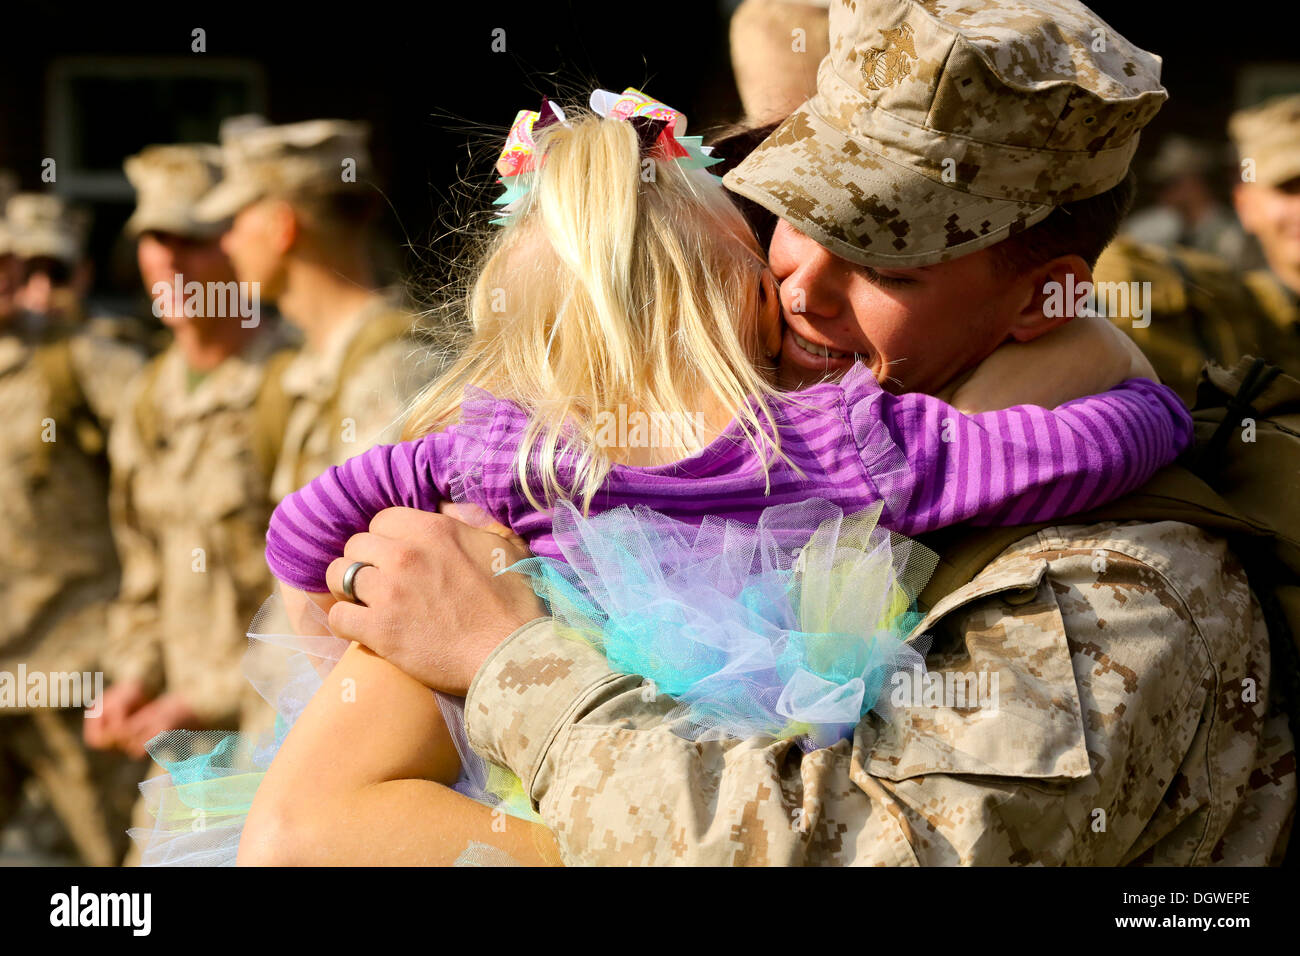 MARINE CORPS BASE CAMP LEJEUNE, N.C. - Lance Cpl. Travis Hegmann, a team leader with Fox Company, 2nd Battalion, 2nd Marine Regiment, and a Steuart, Fla. native, hugs his daughter for the first time after about an 8-month deployment to Afghanistan in supp Stock Photo